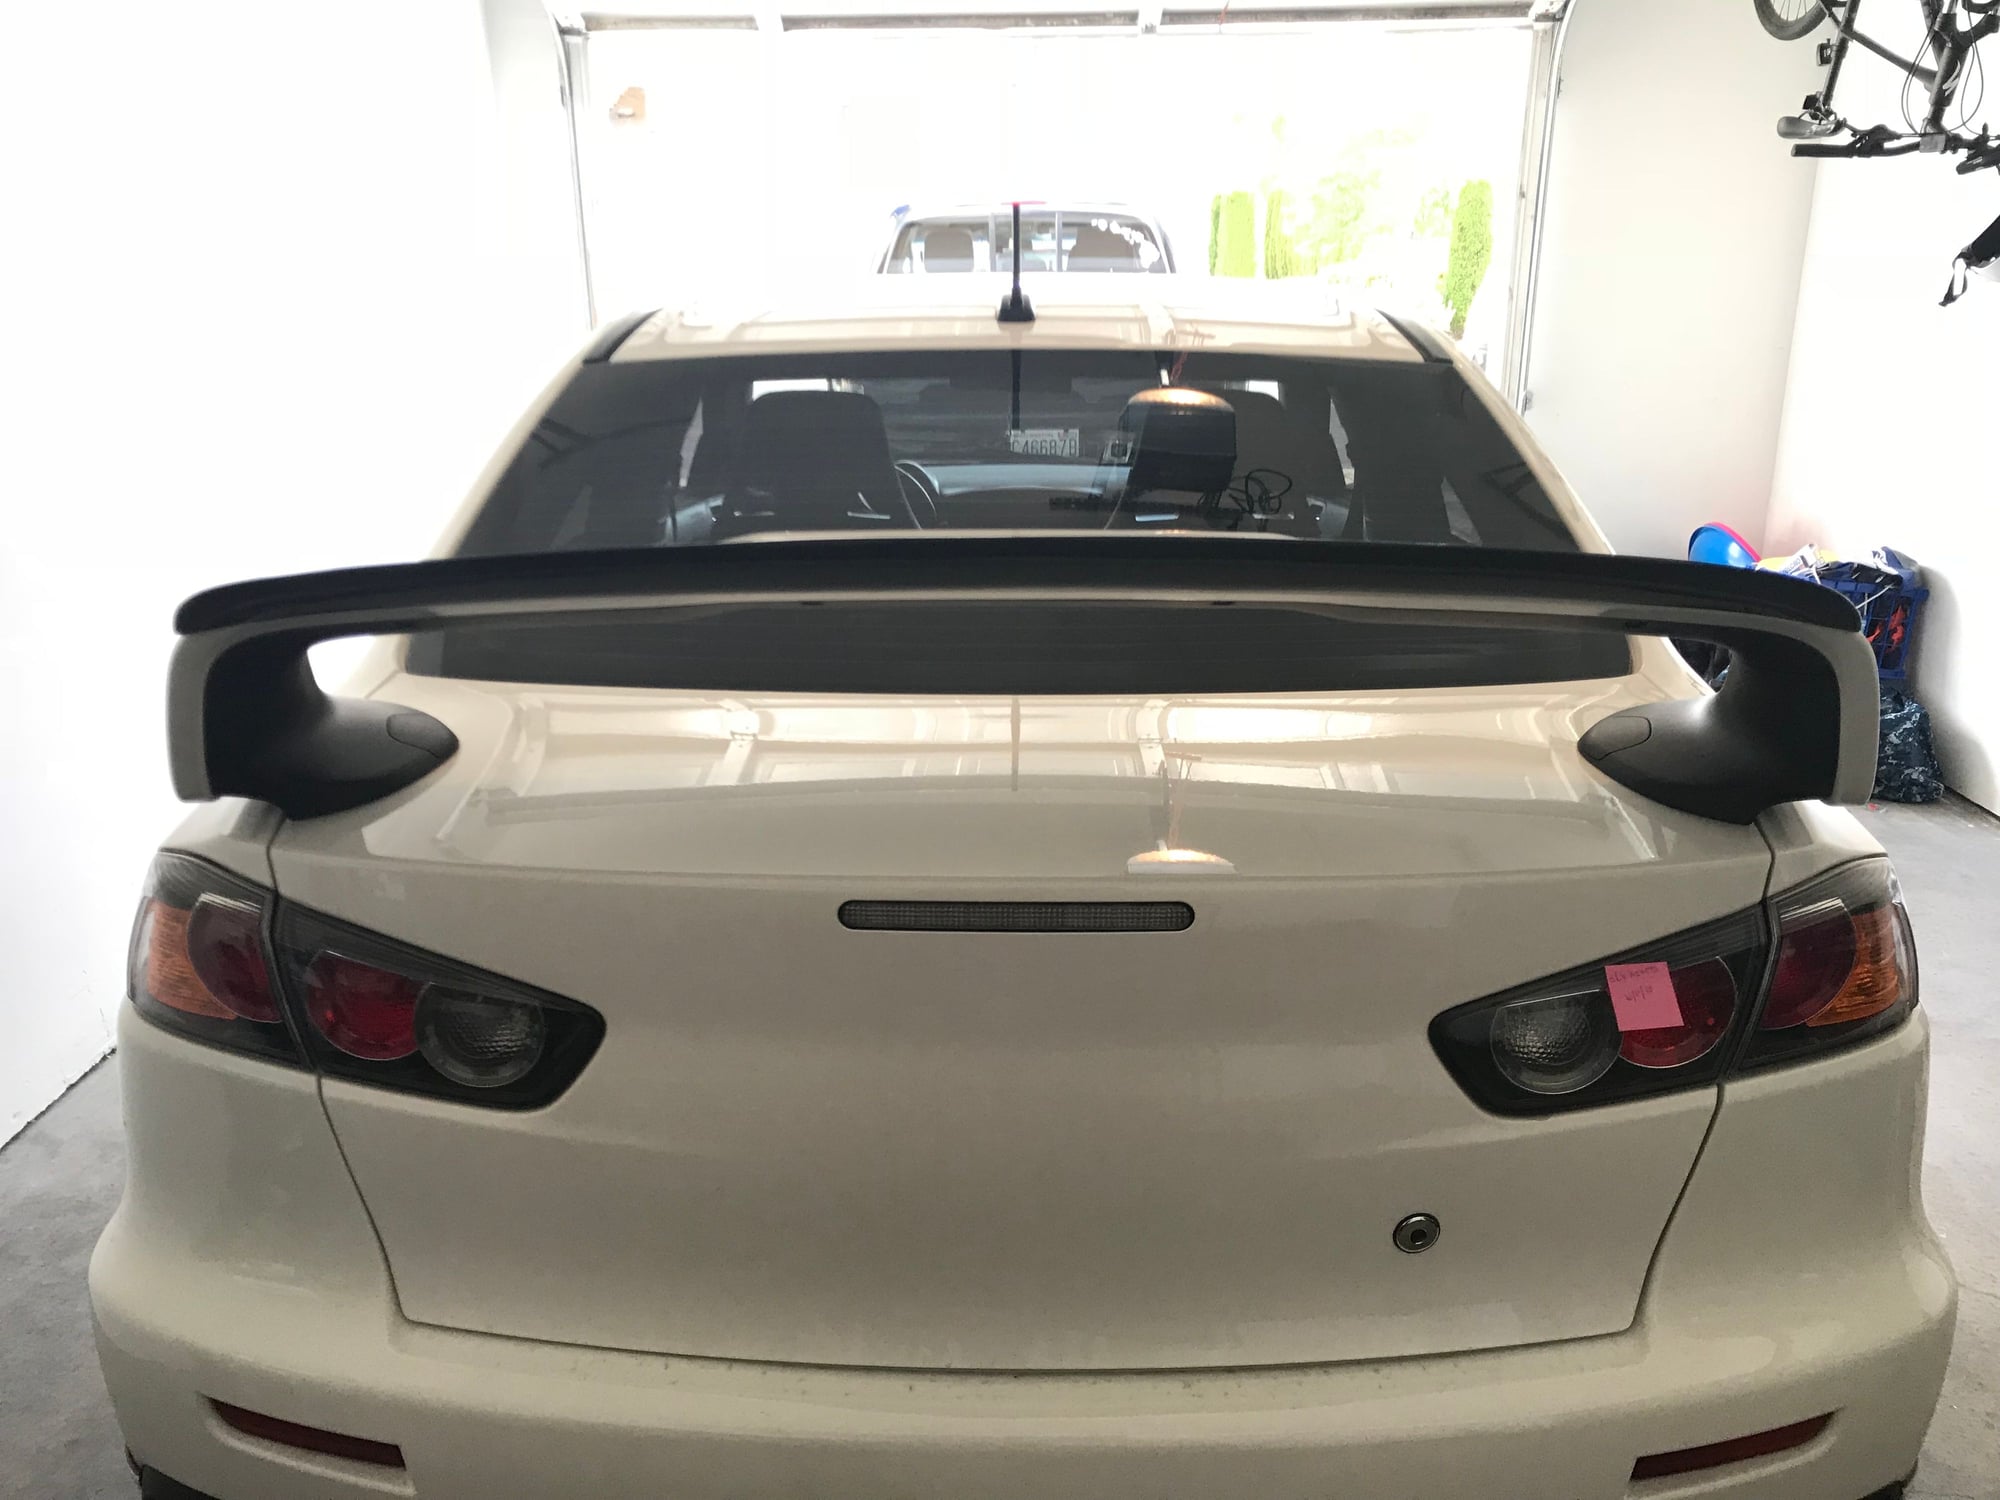 2008 - 2015 Mitsubishi Lancer Evolution - WTT: Wing with trunk and gurney for MR trunk - Used - Seattle, WA 98125, United States